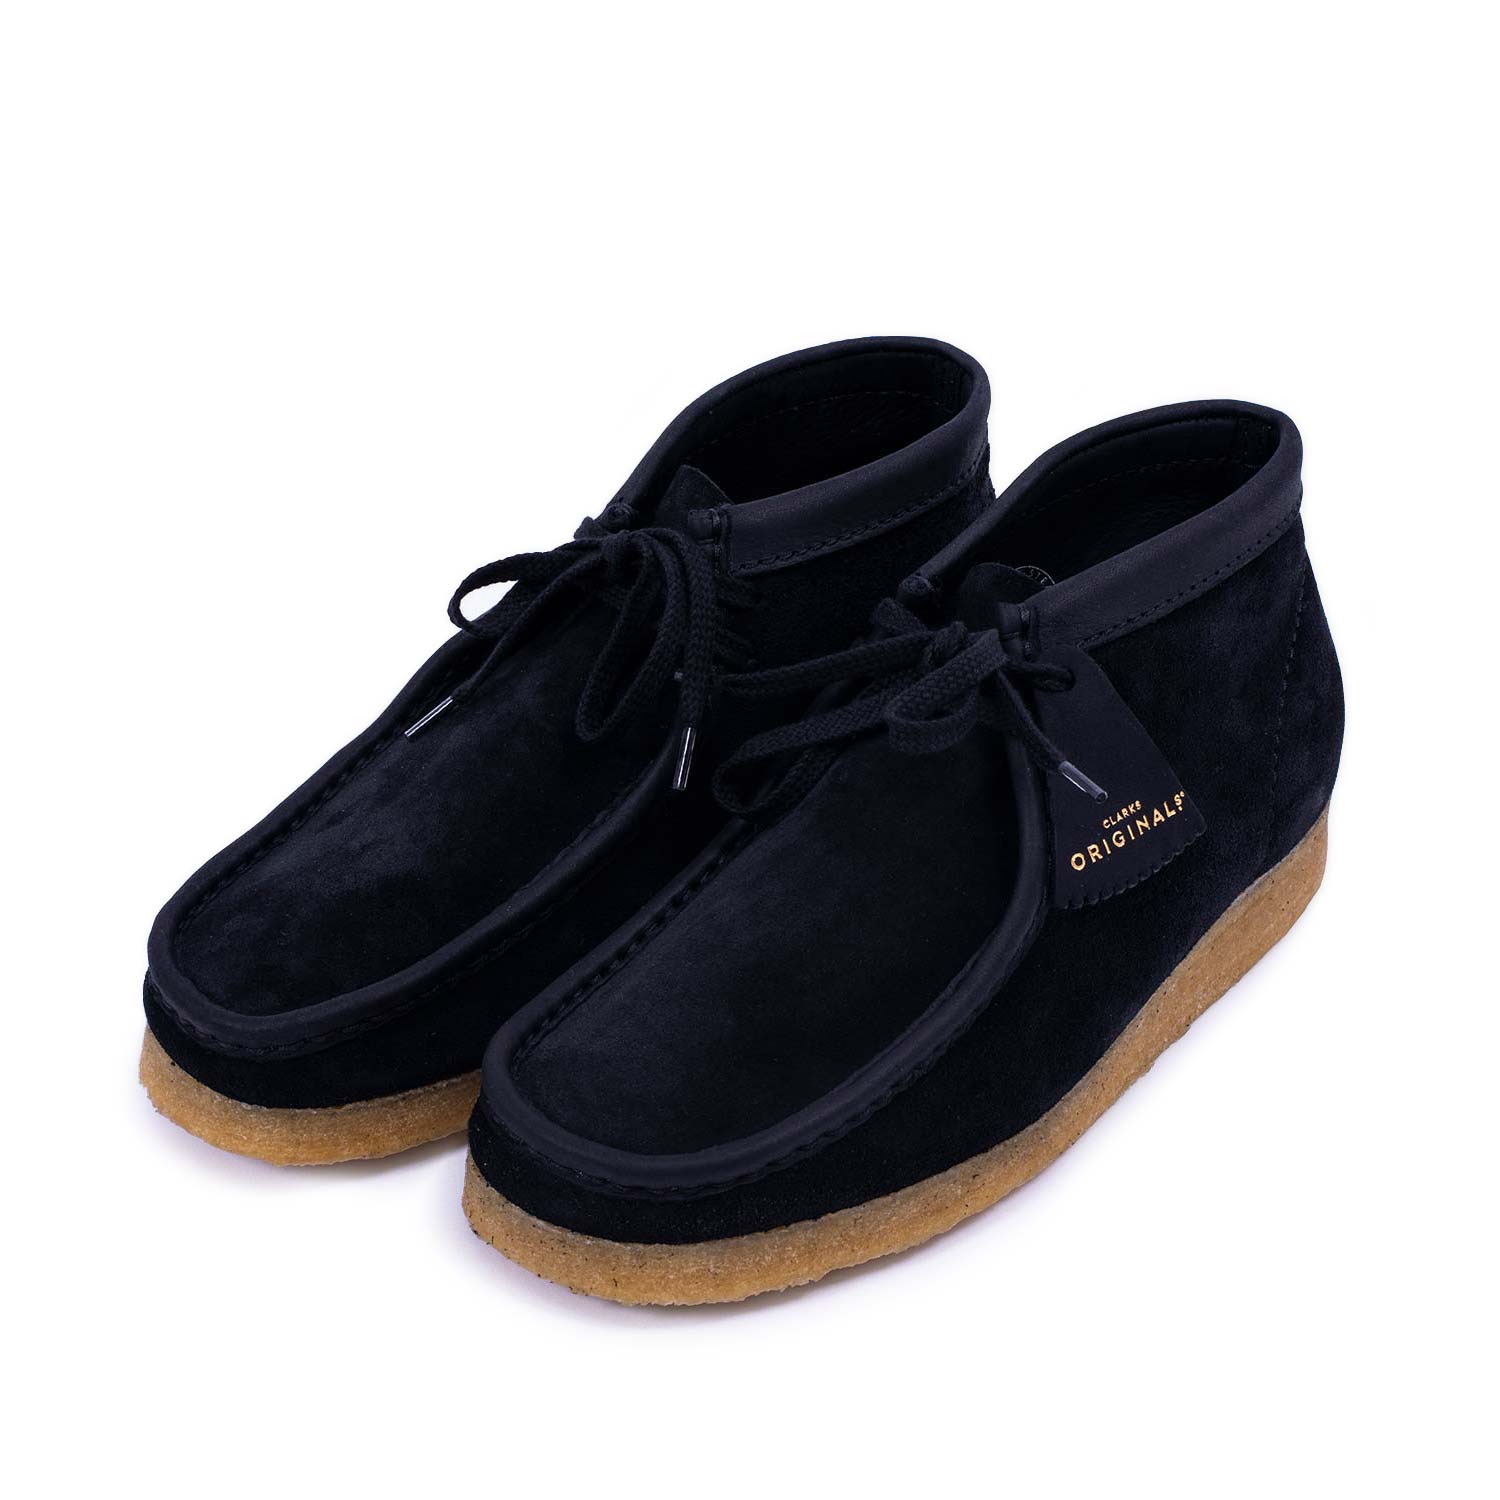 clarks wallabee made in italy